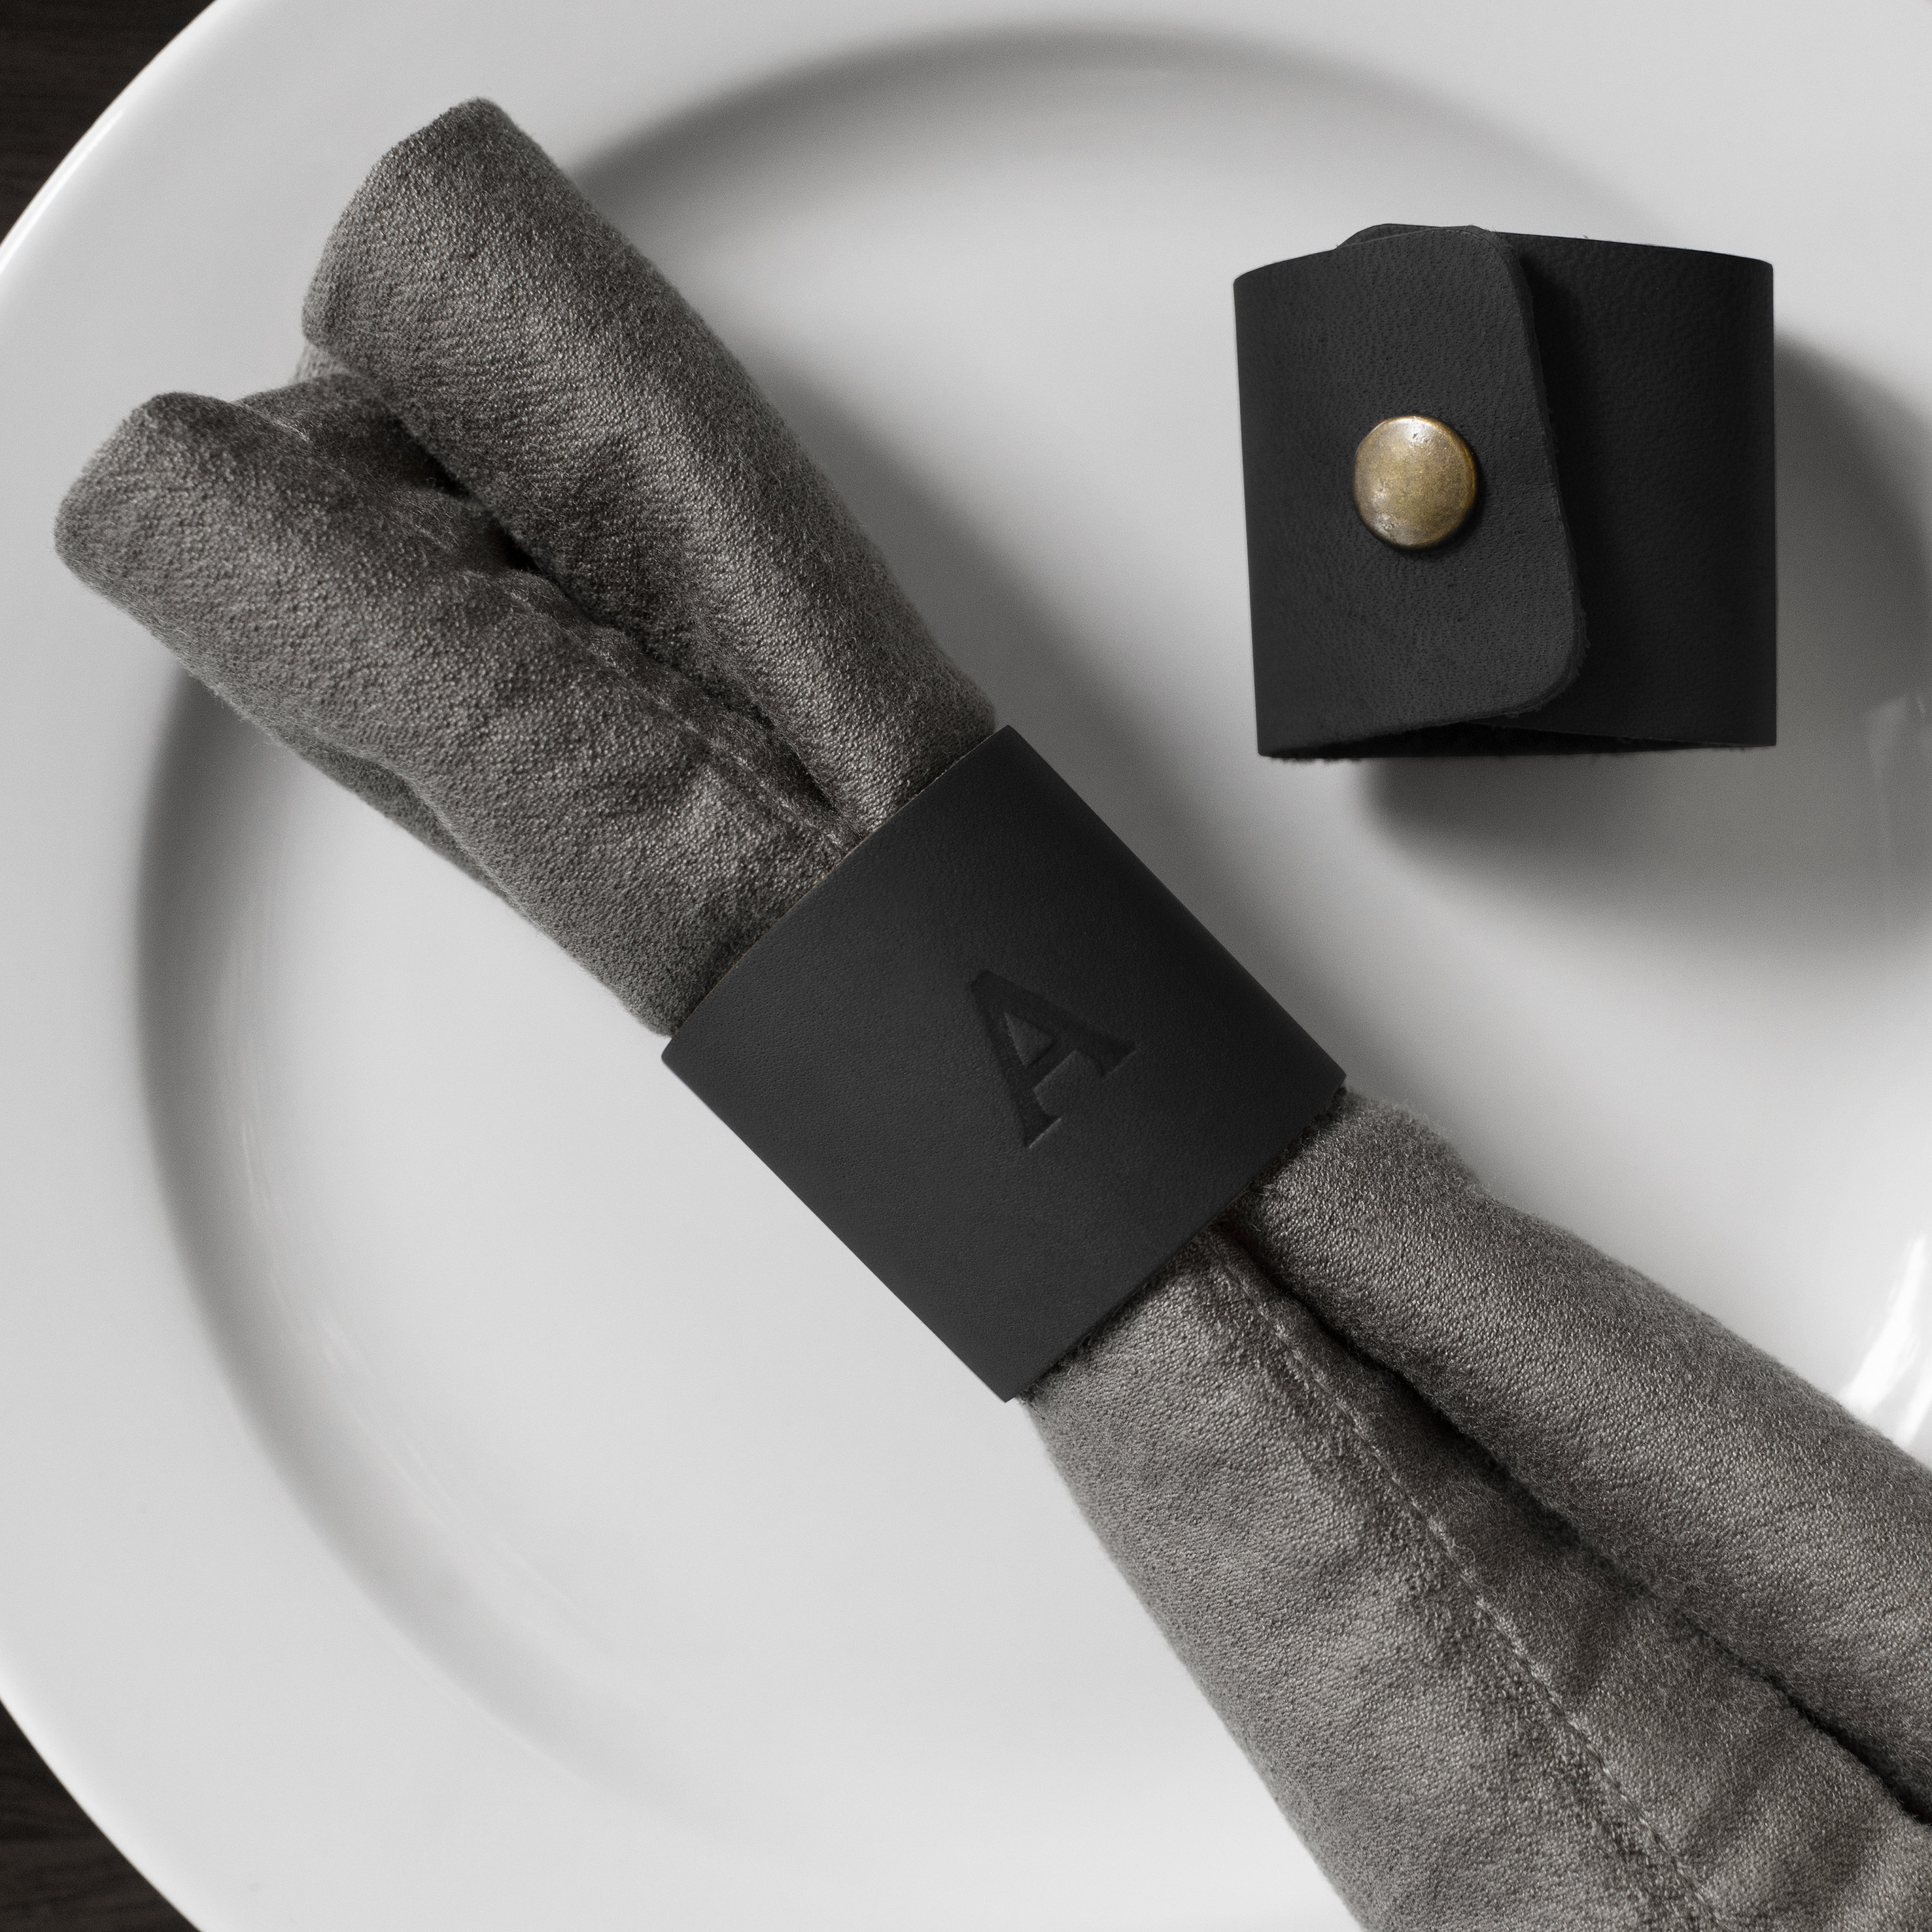 Personalized Leather Napkin Ring